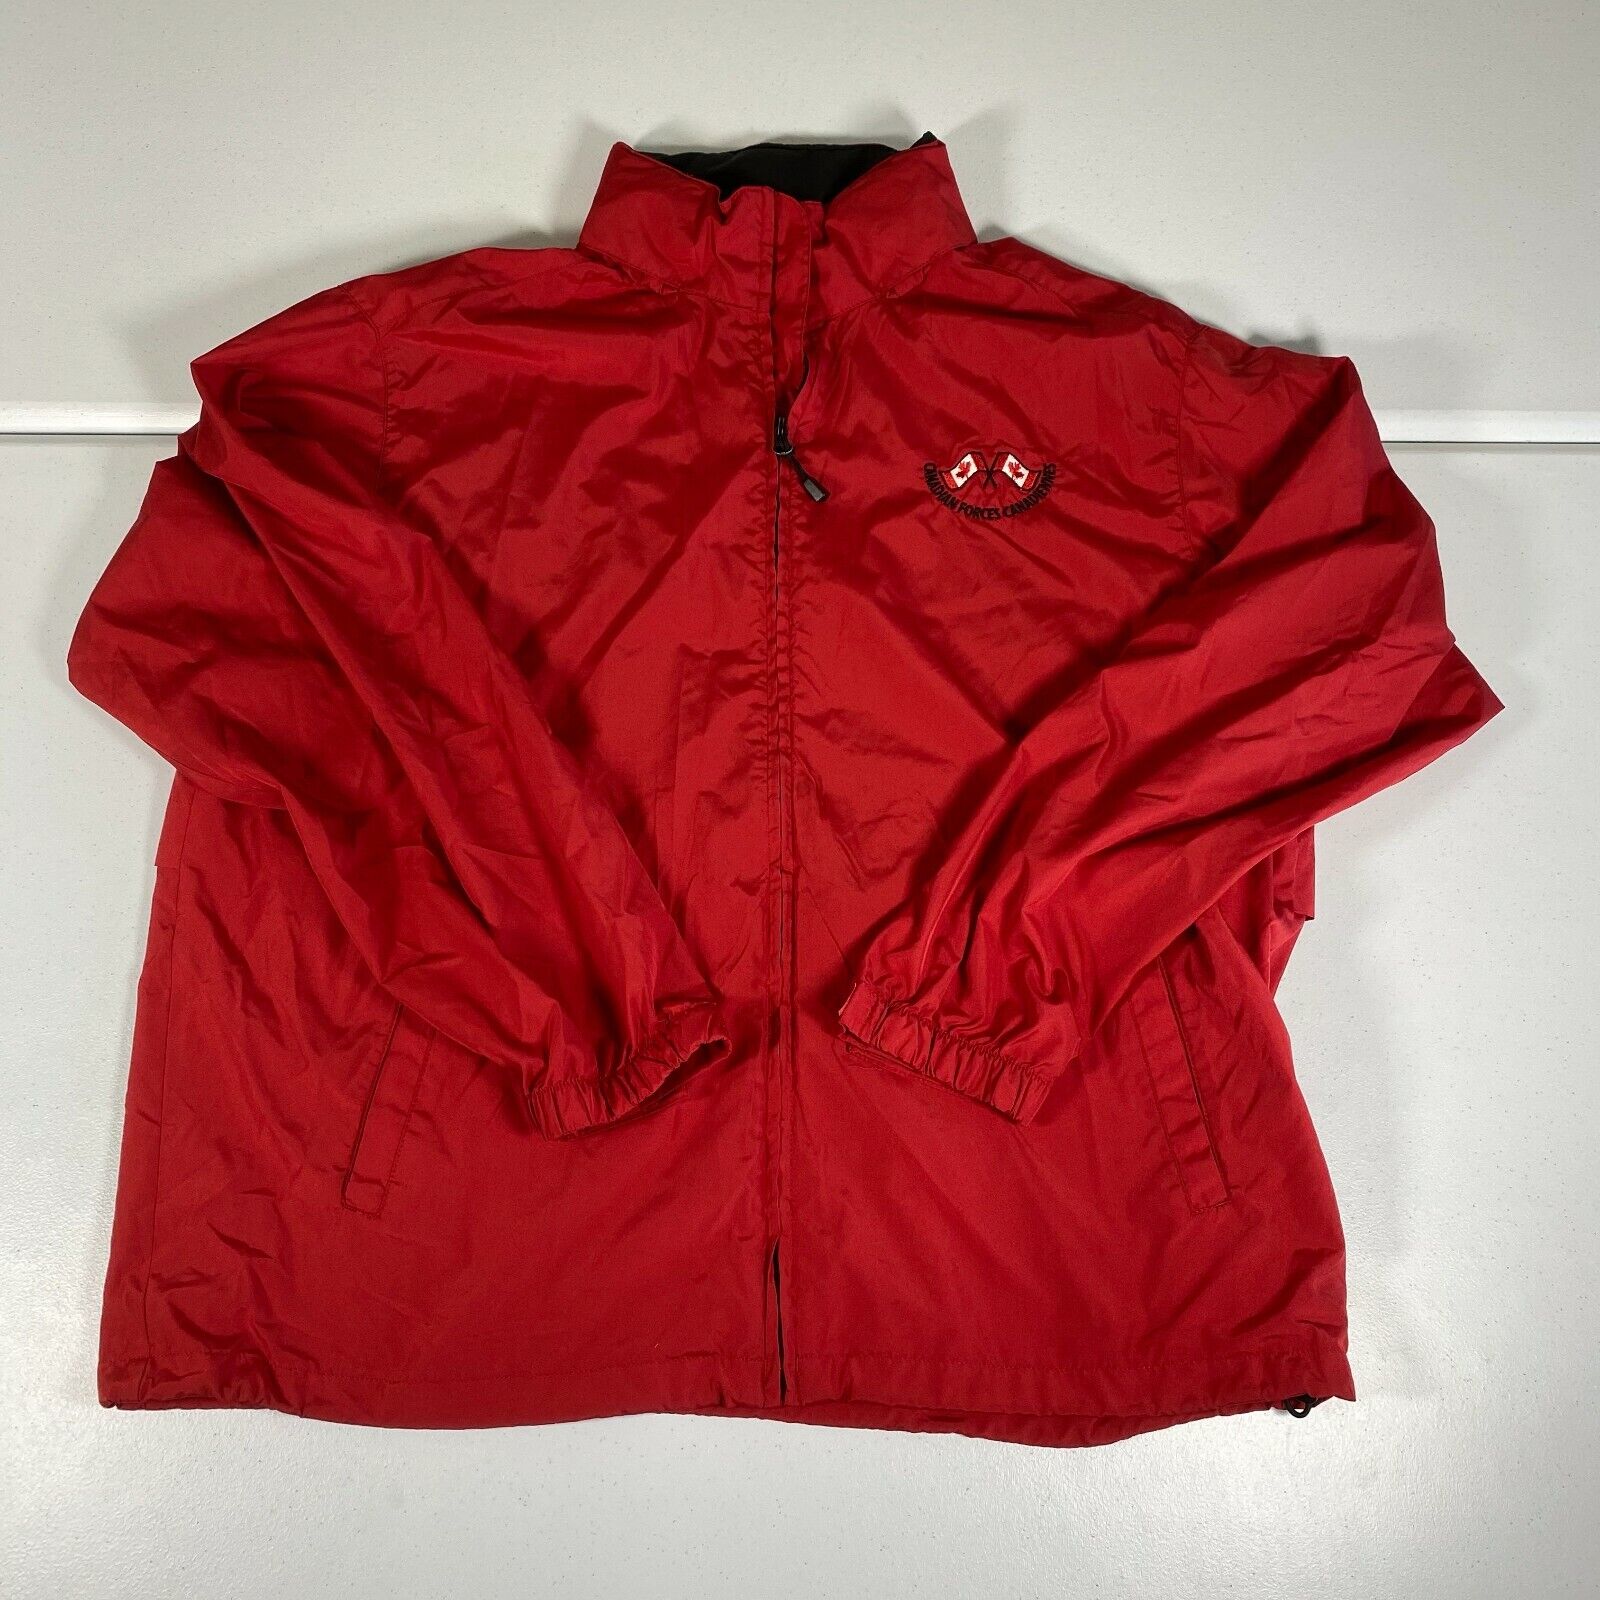 MENS NORTH END ALL CLIMATE WEAR JACKET Size L | eBay